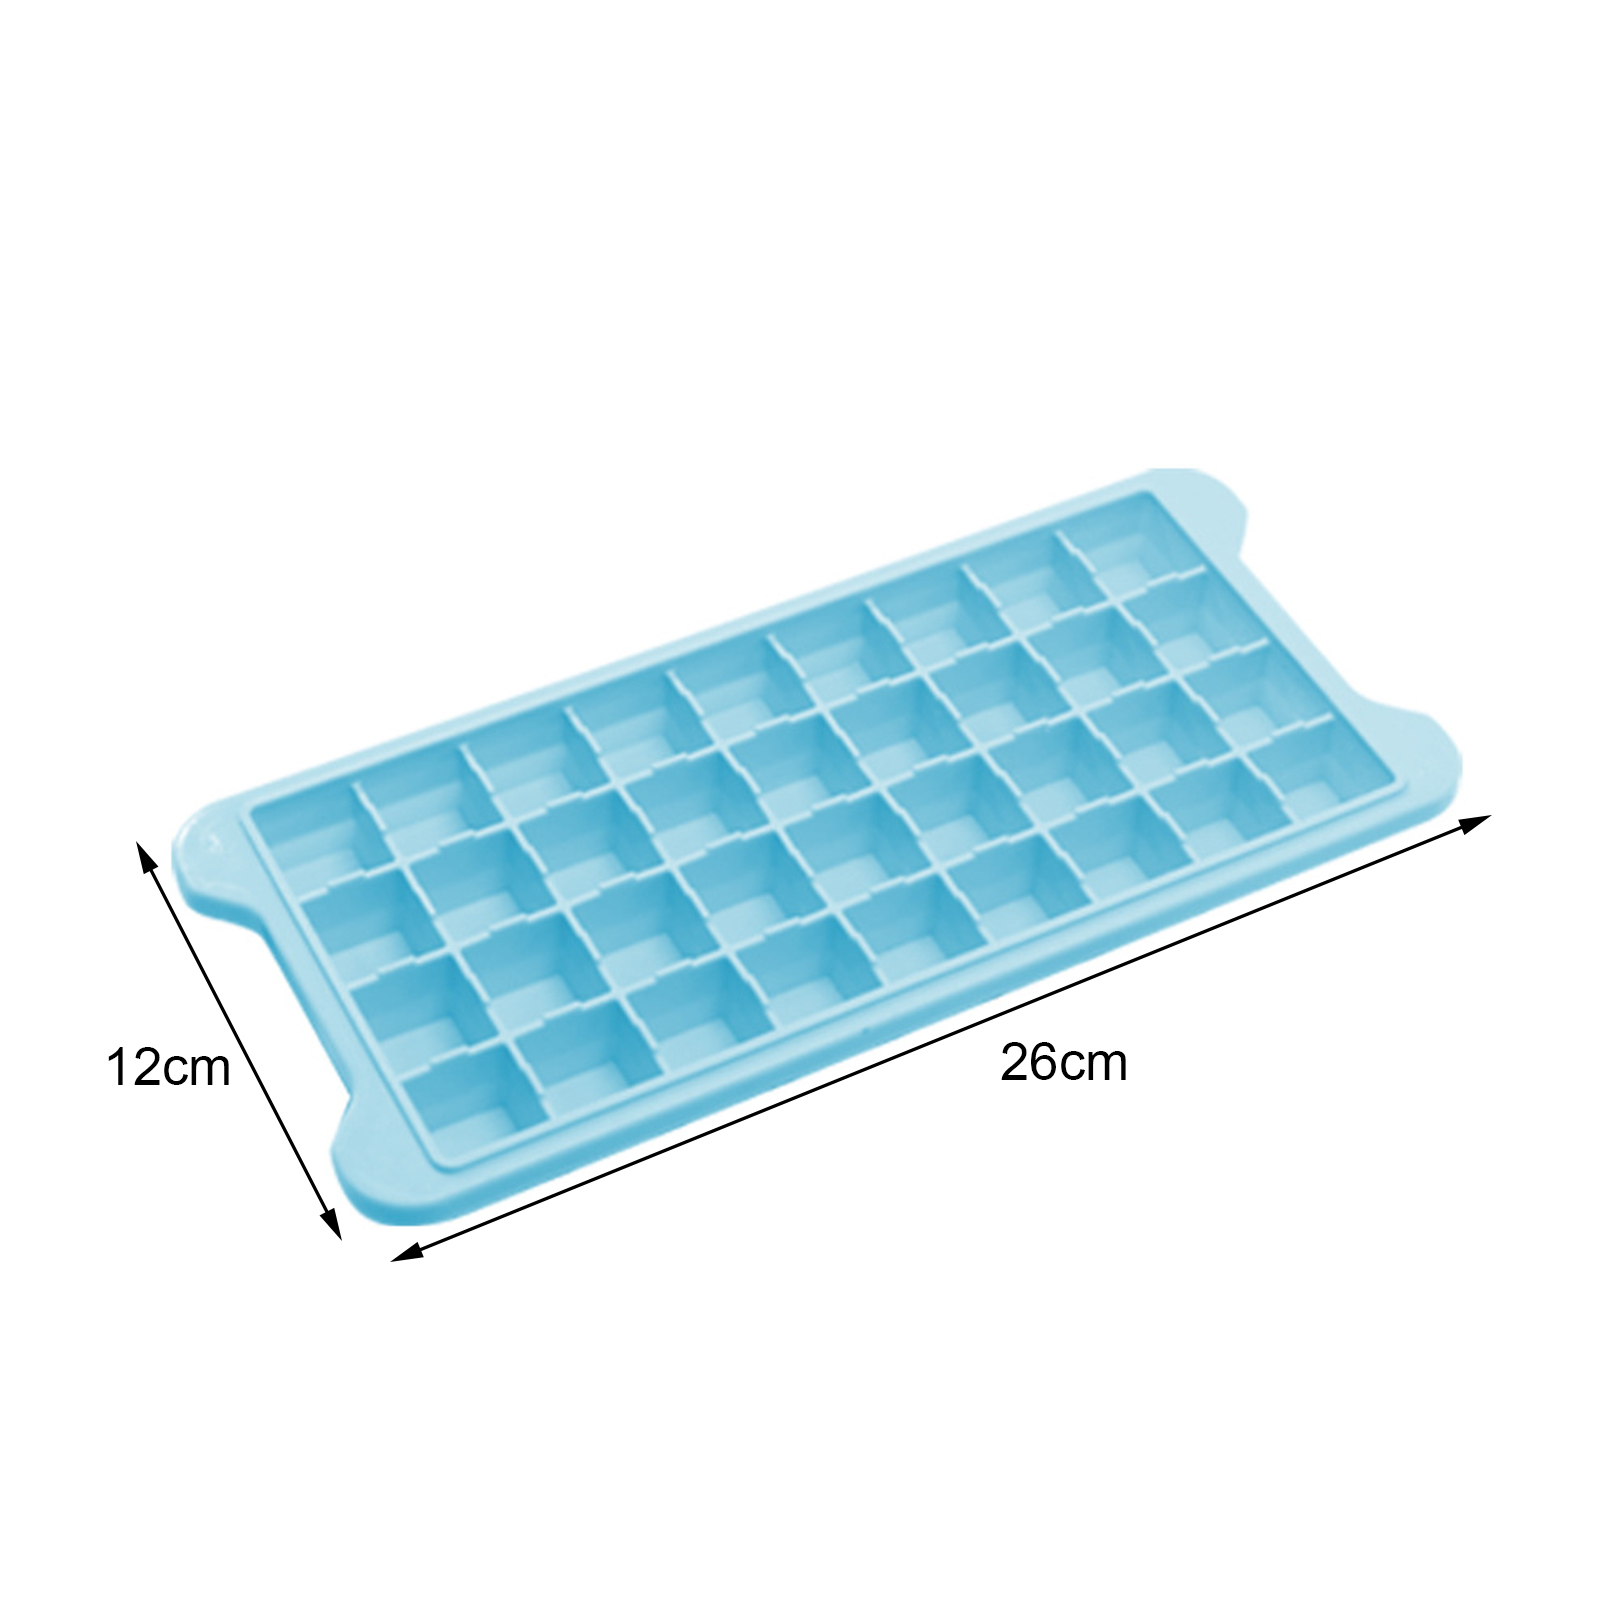 Ice Cube Trays,Ice Tray Food Grade Flexible Silicone Ice Cube Tray Molds with Lids, Easy Release Ice Trays Make 24/36 Ice Cube, Stackable Dishwasher Safe - image 5 of 8